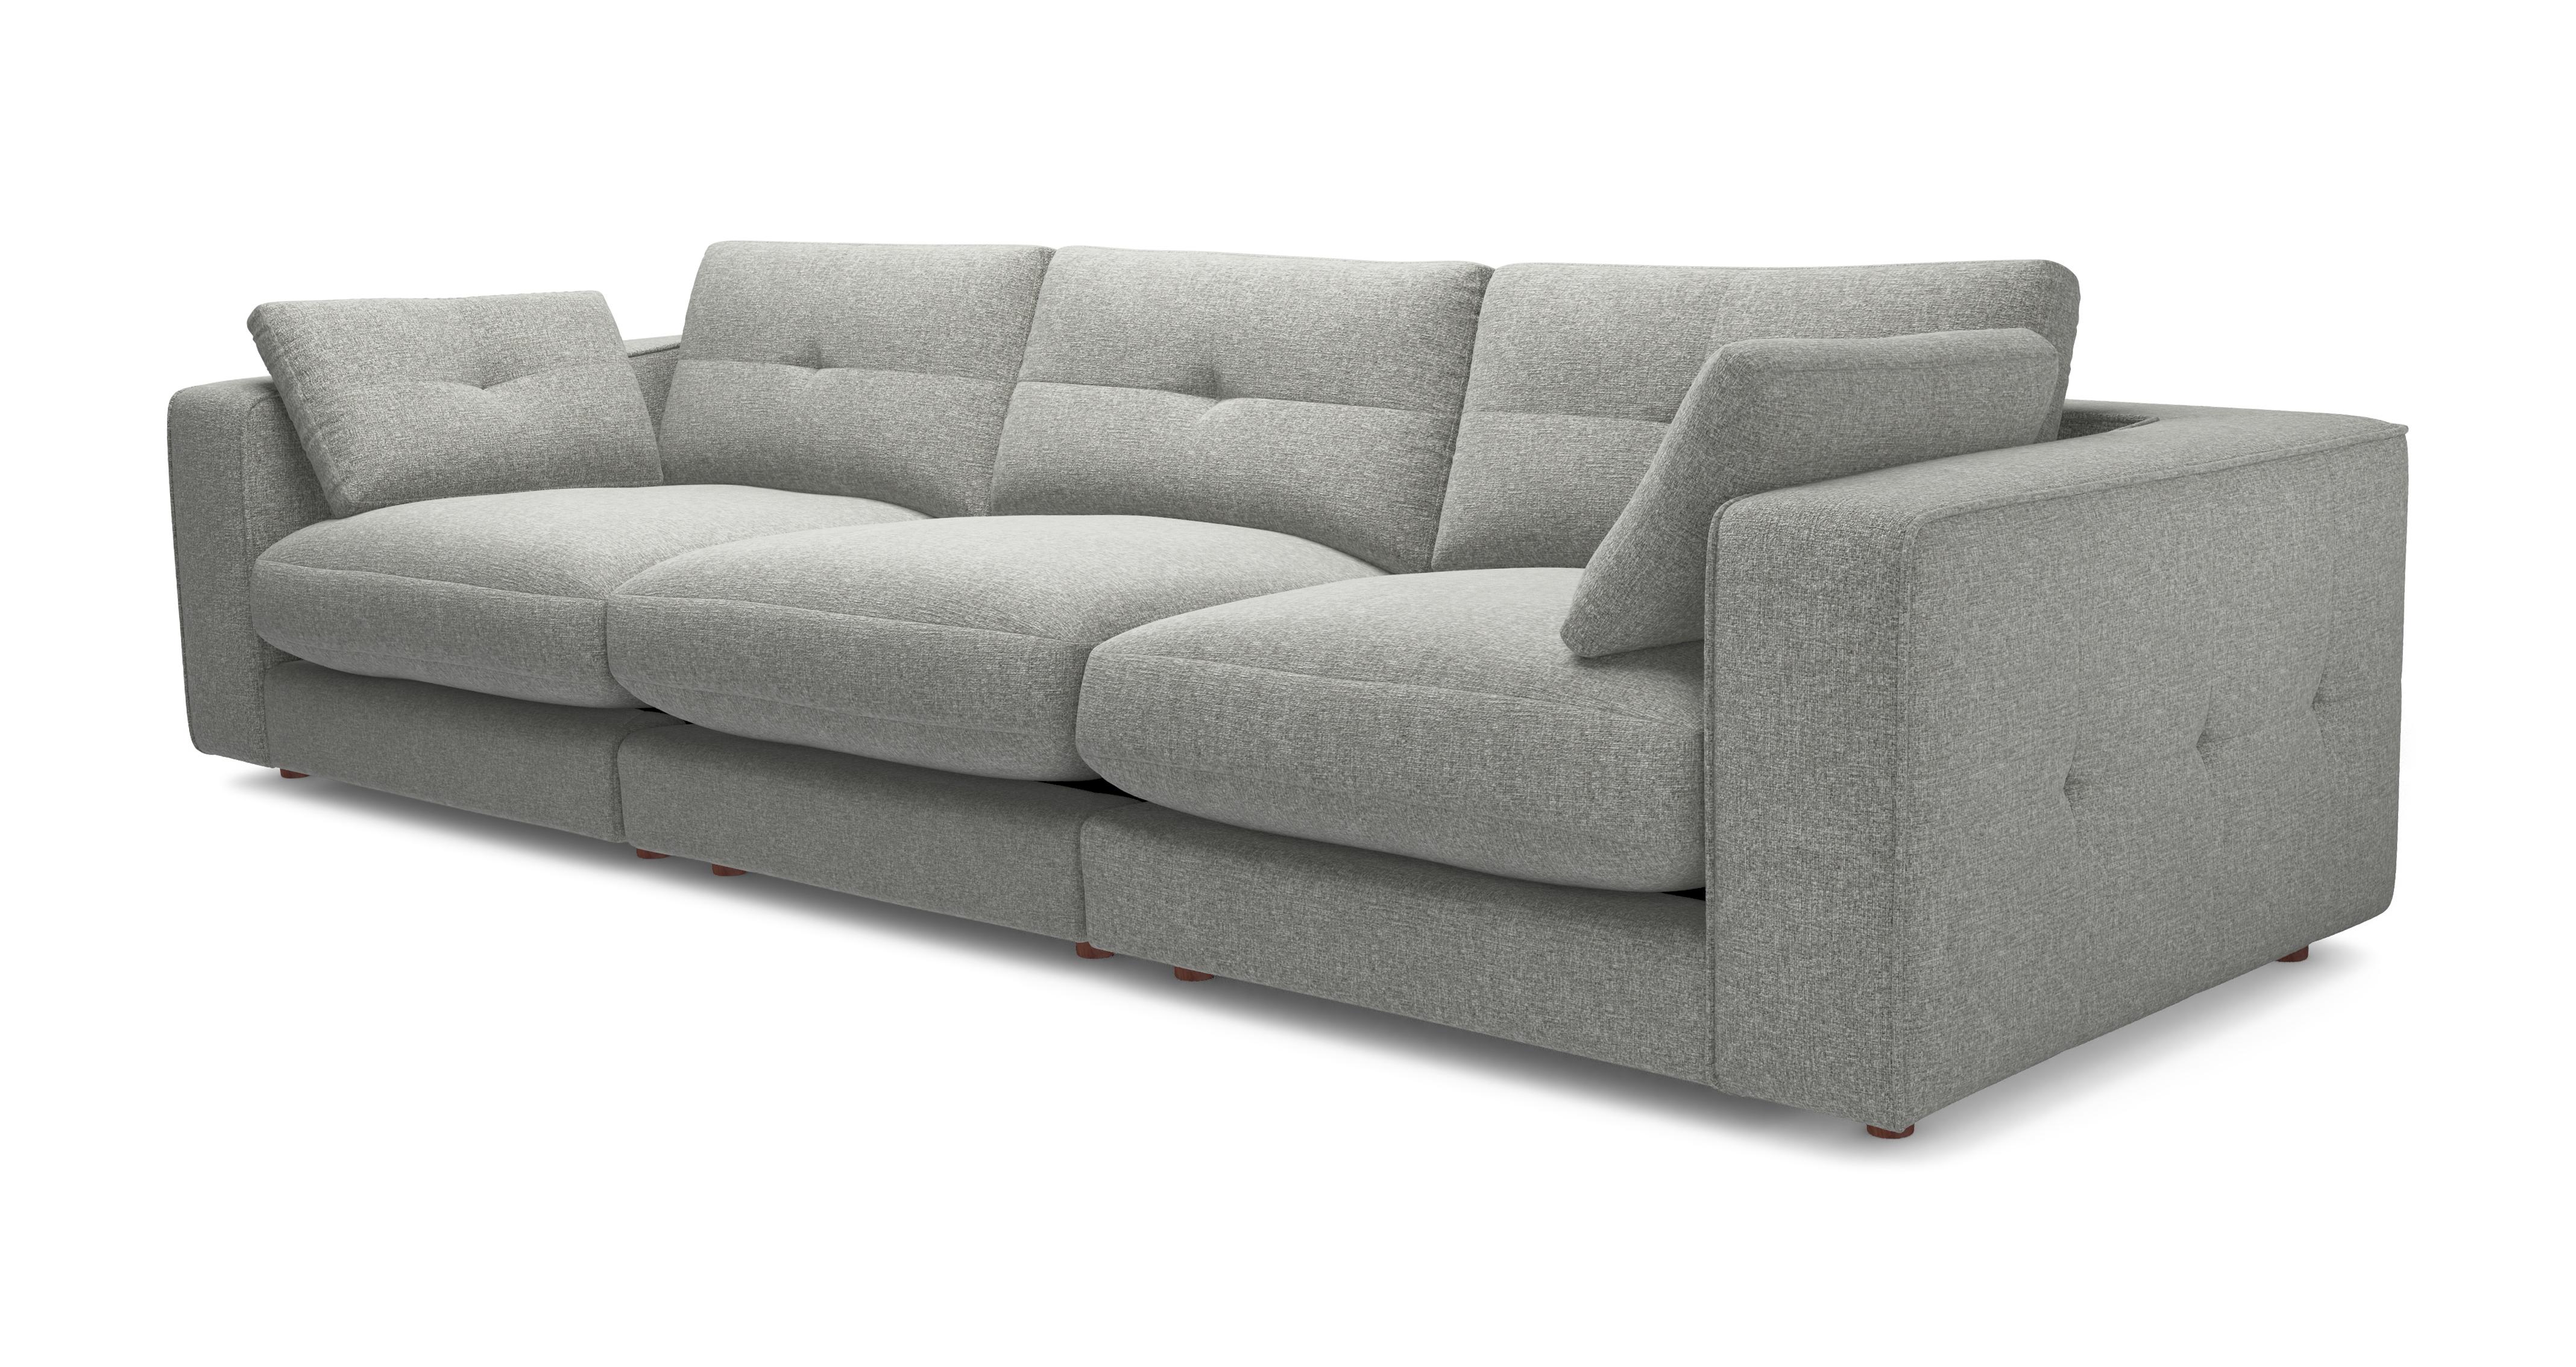 DFS x Grand Designs: What to buy from the sustainable sofa range